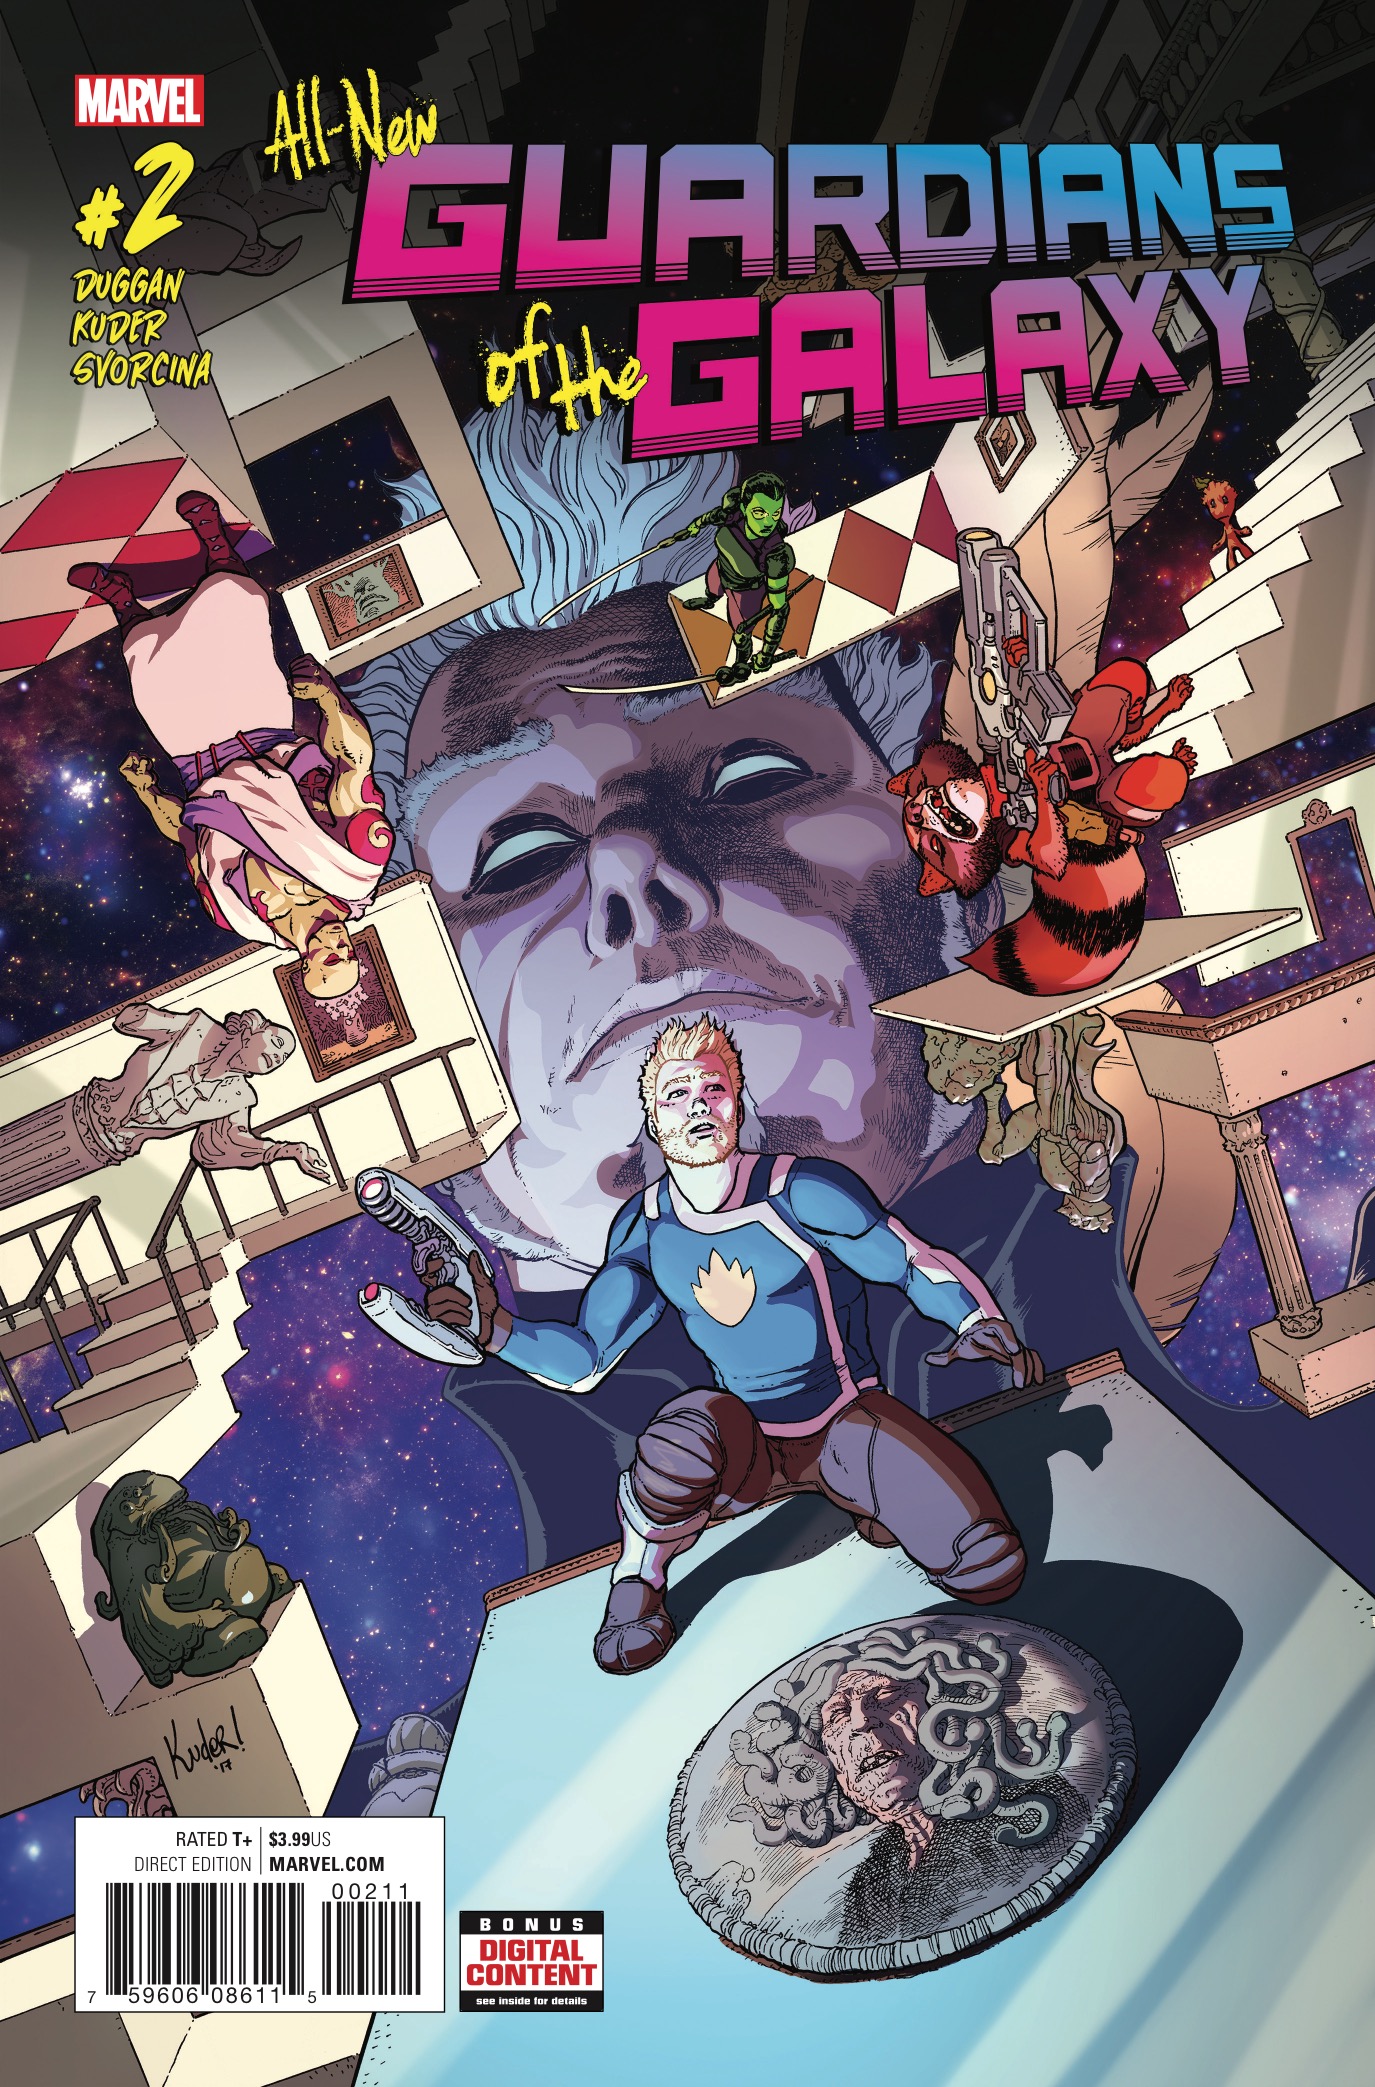 All-New Guardians of the Galaxy #2 Review